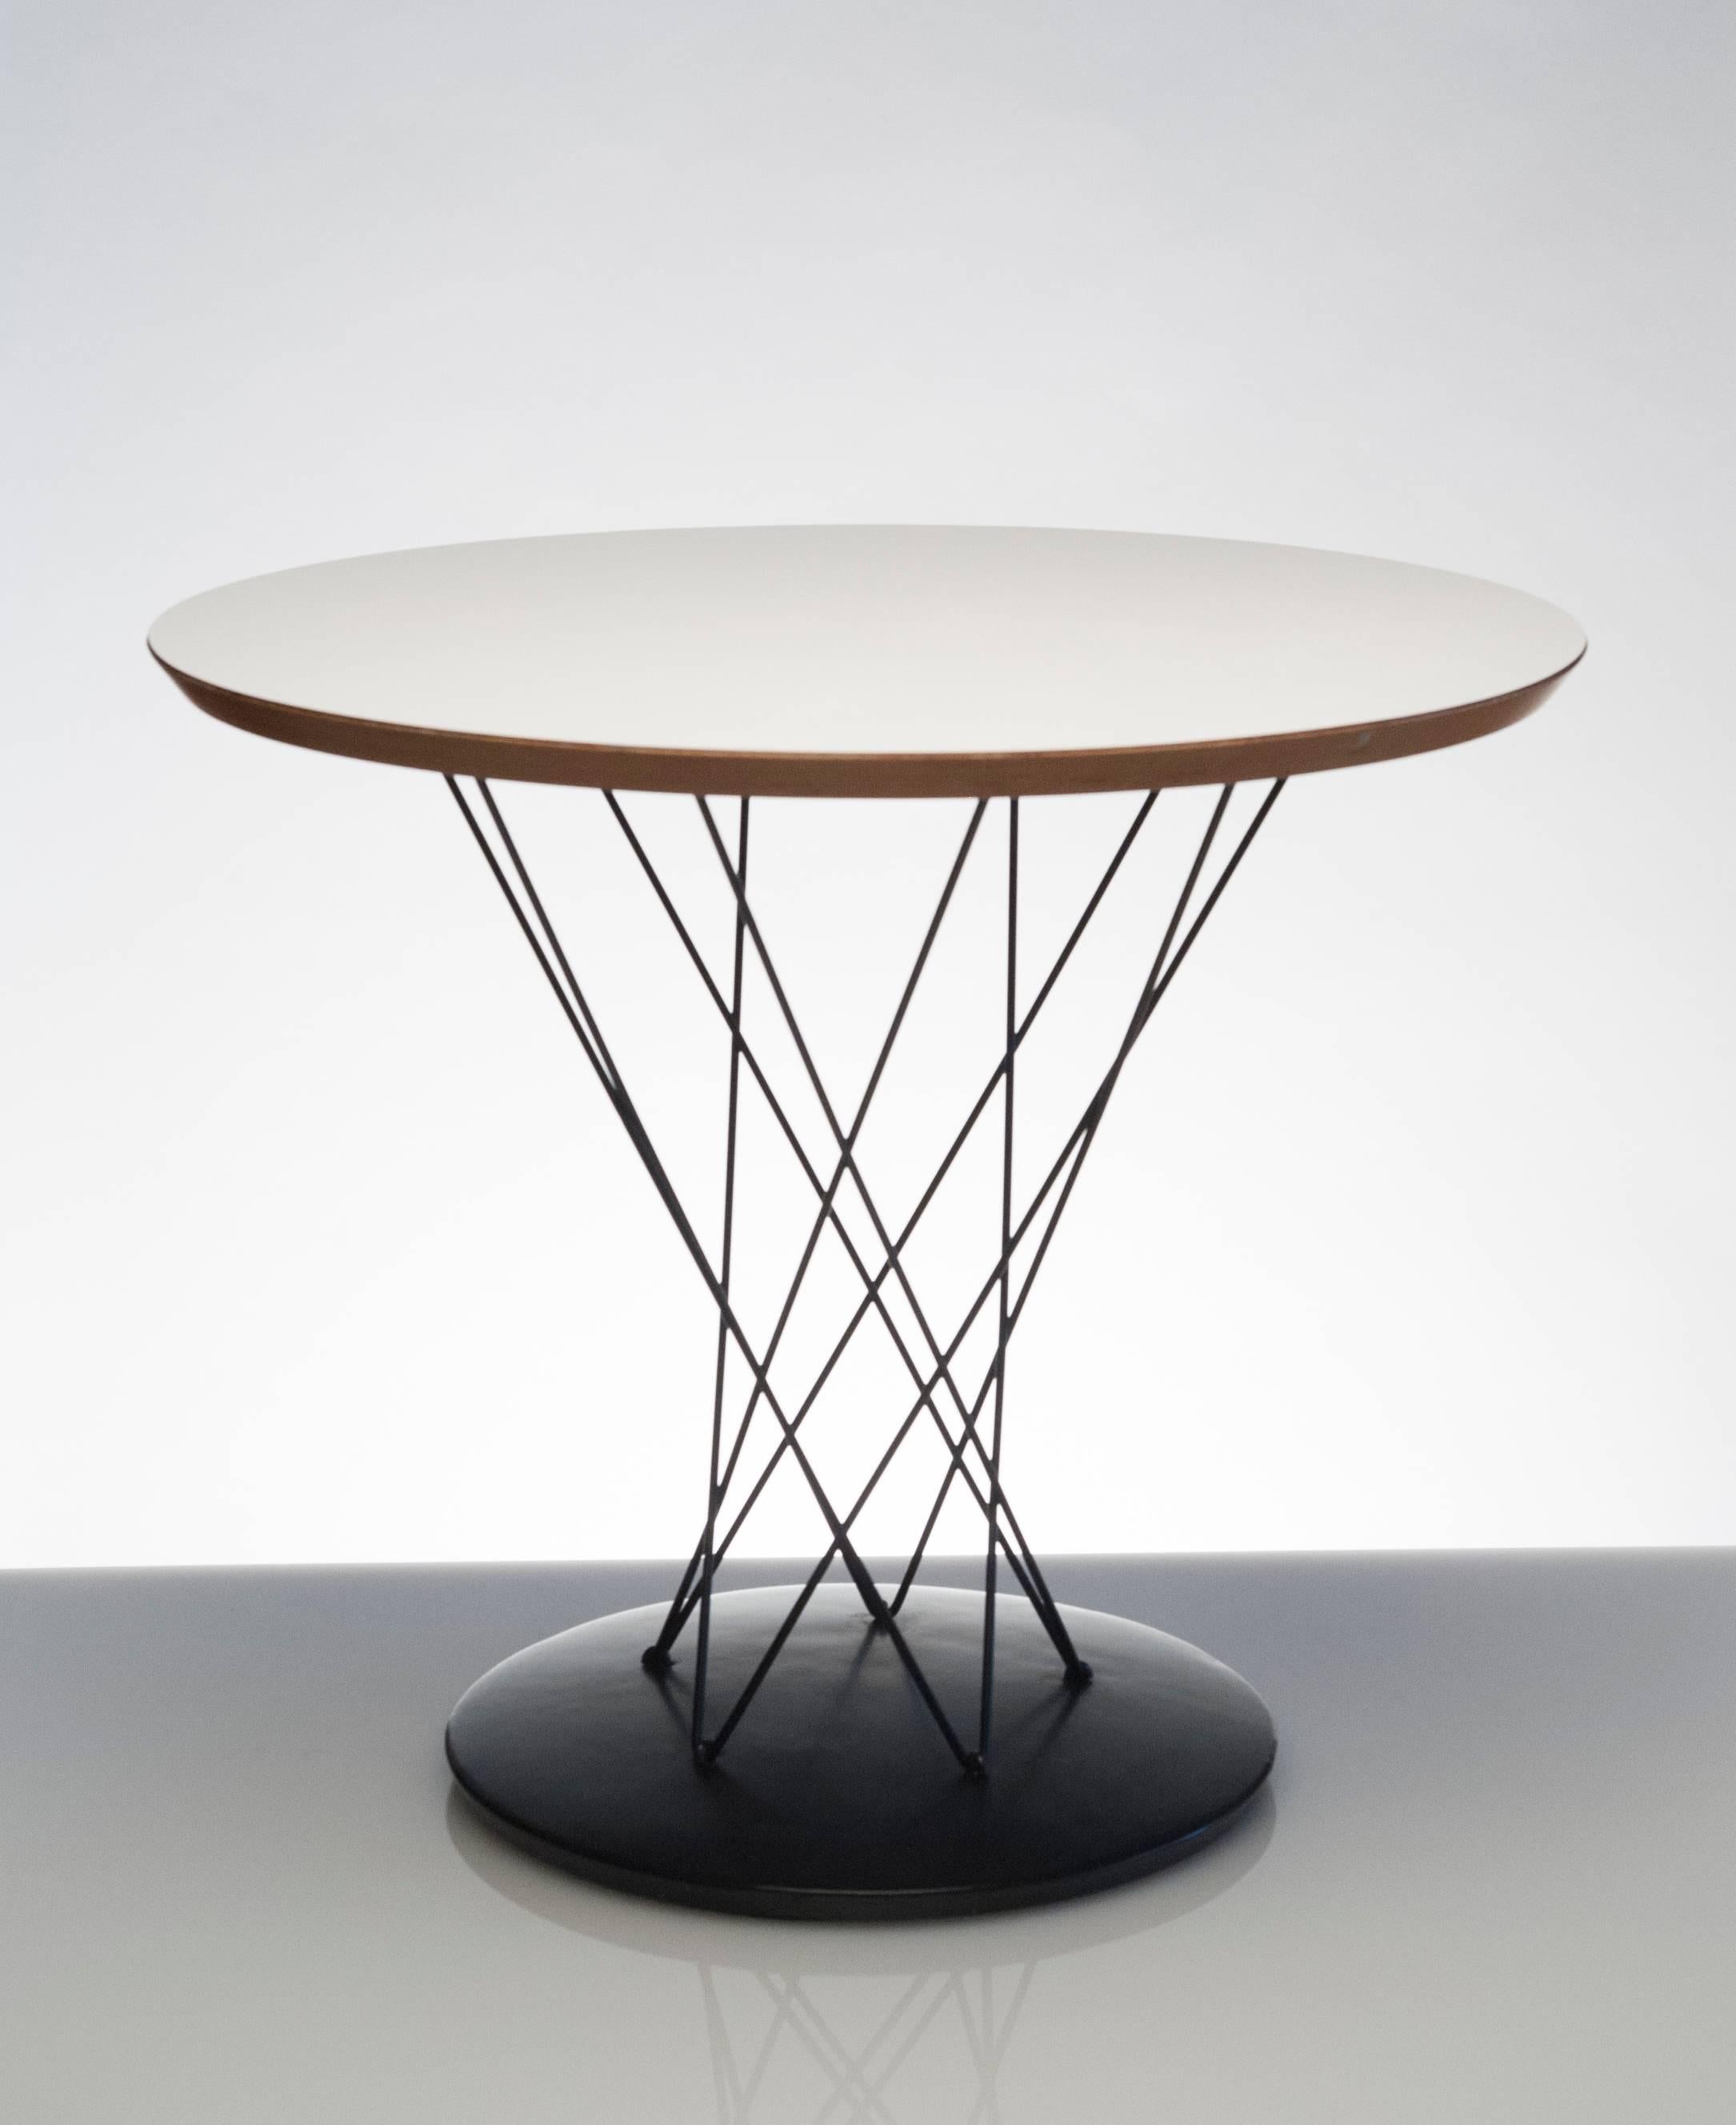 Early vintage table by Isamu Noguchi for Knoll. Originally purchased from Knoll in the 1950s. Table would work well as an end table or bedside table.